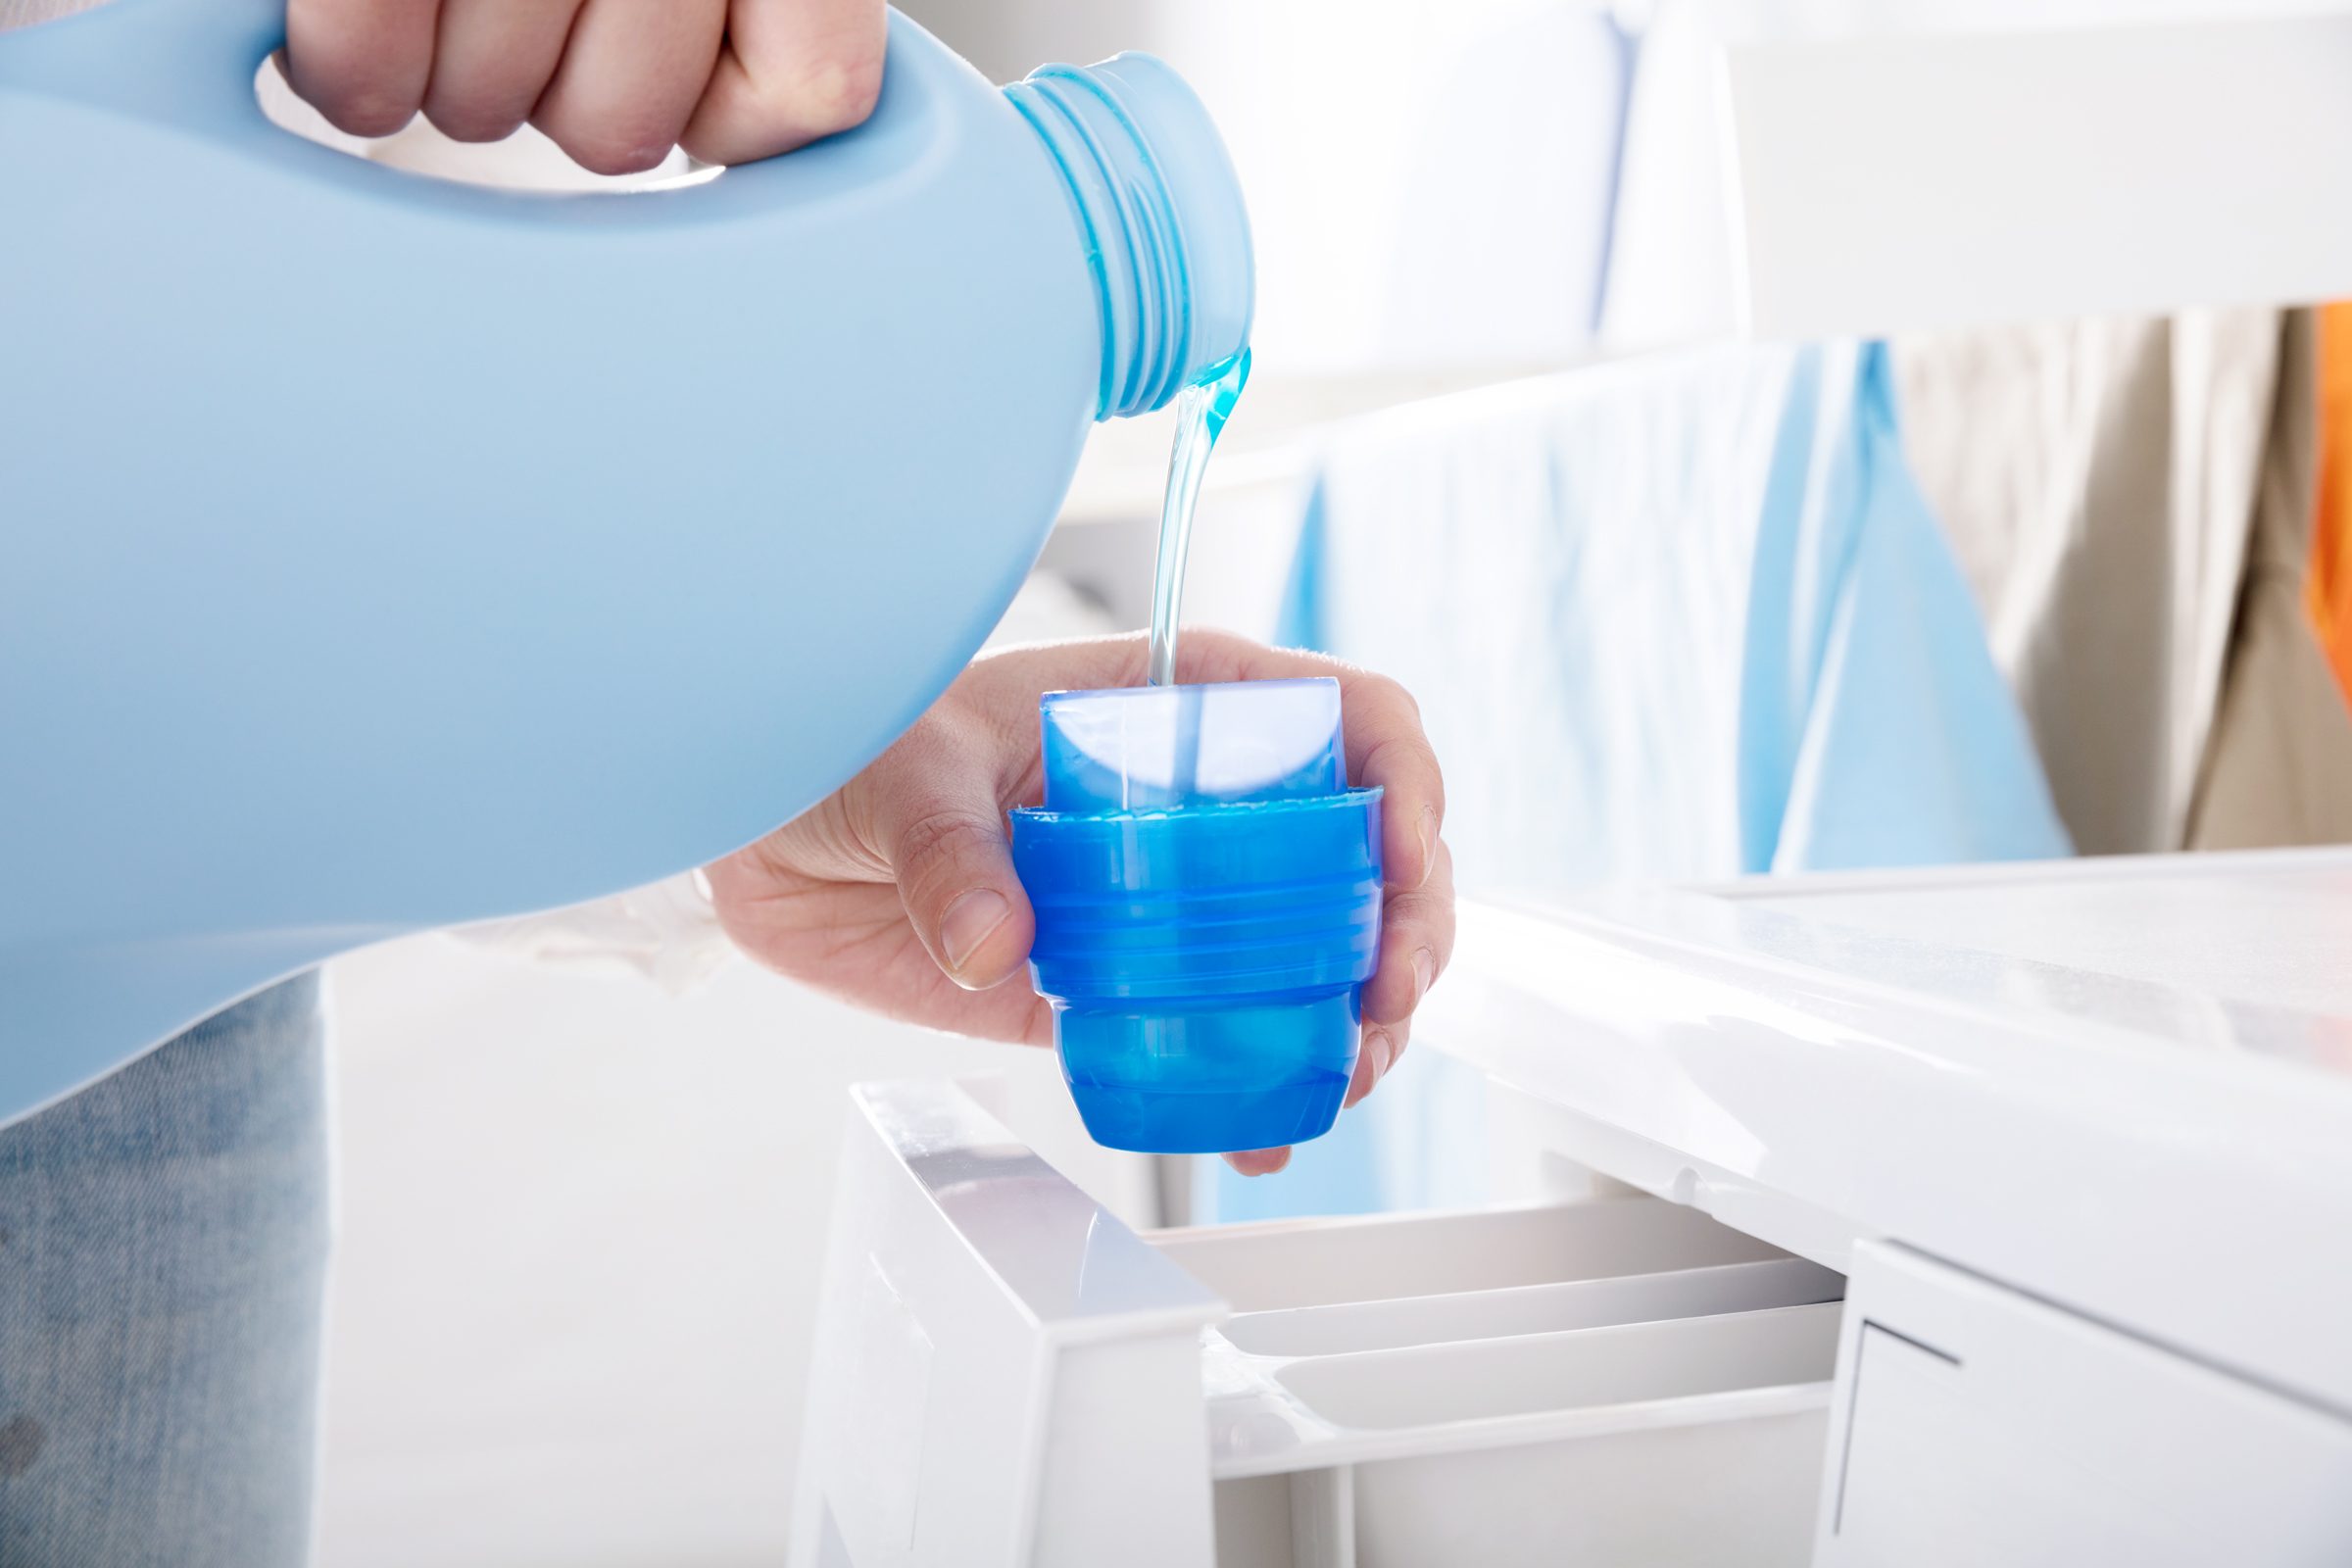  Laundry Detergent Measuring Cup